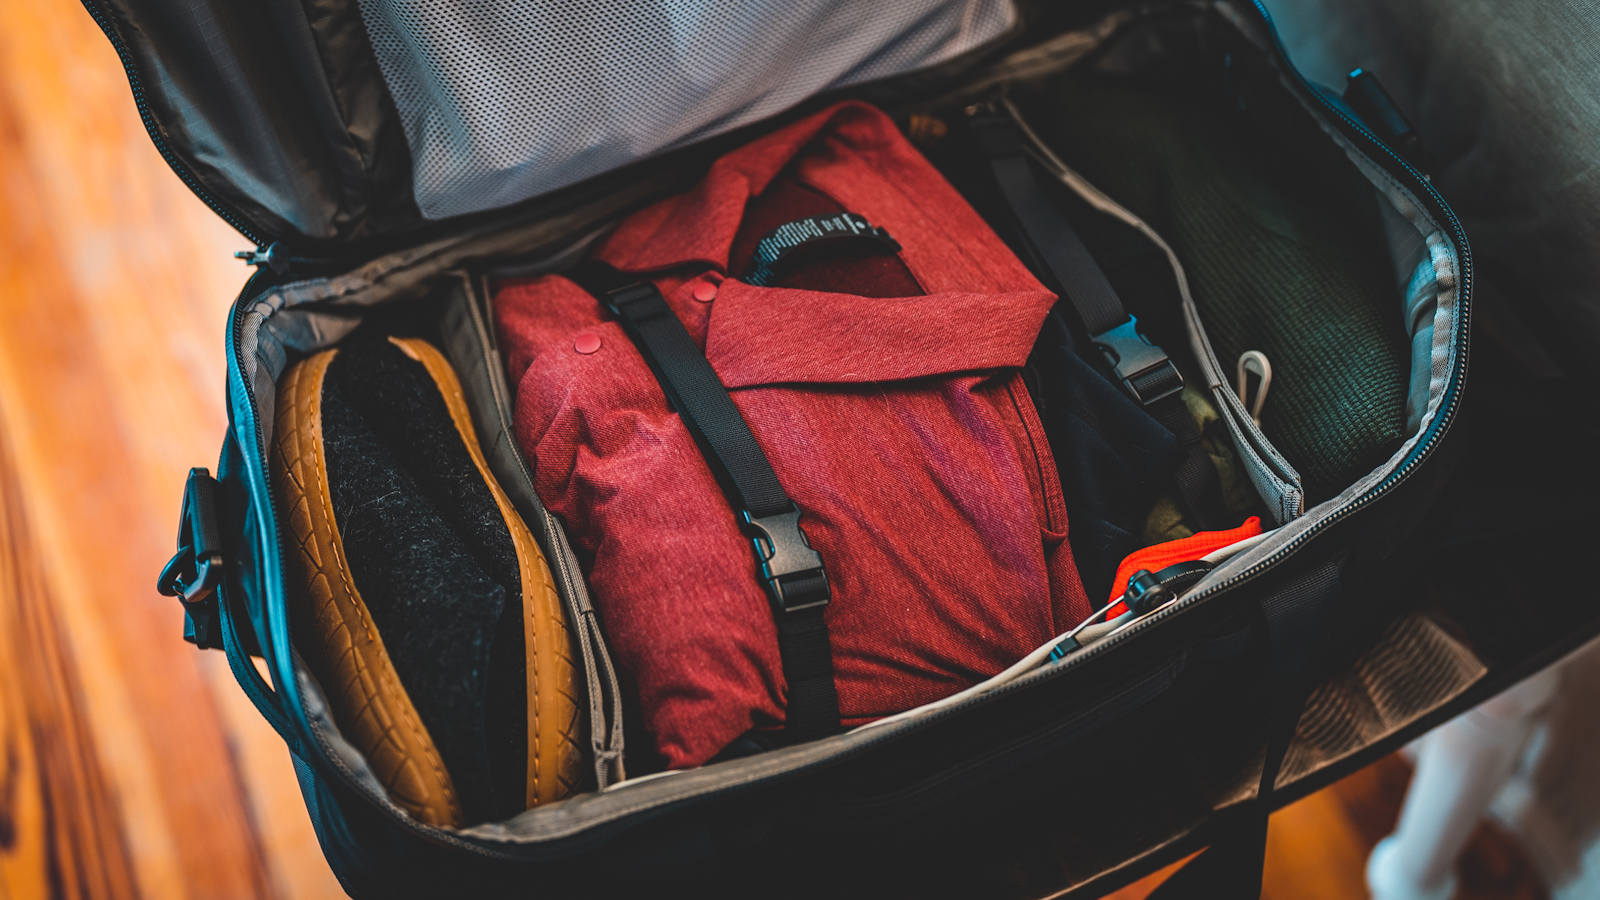 The 12 Best Travel Duffel Bags That Hold So Much More Than You'd Expect